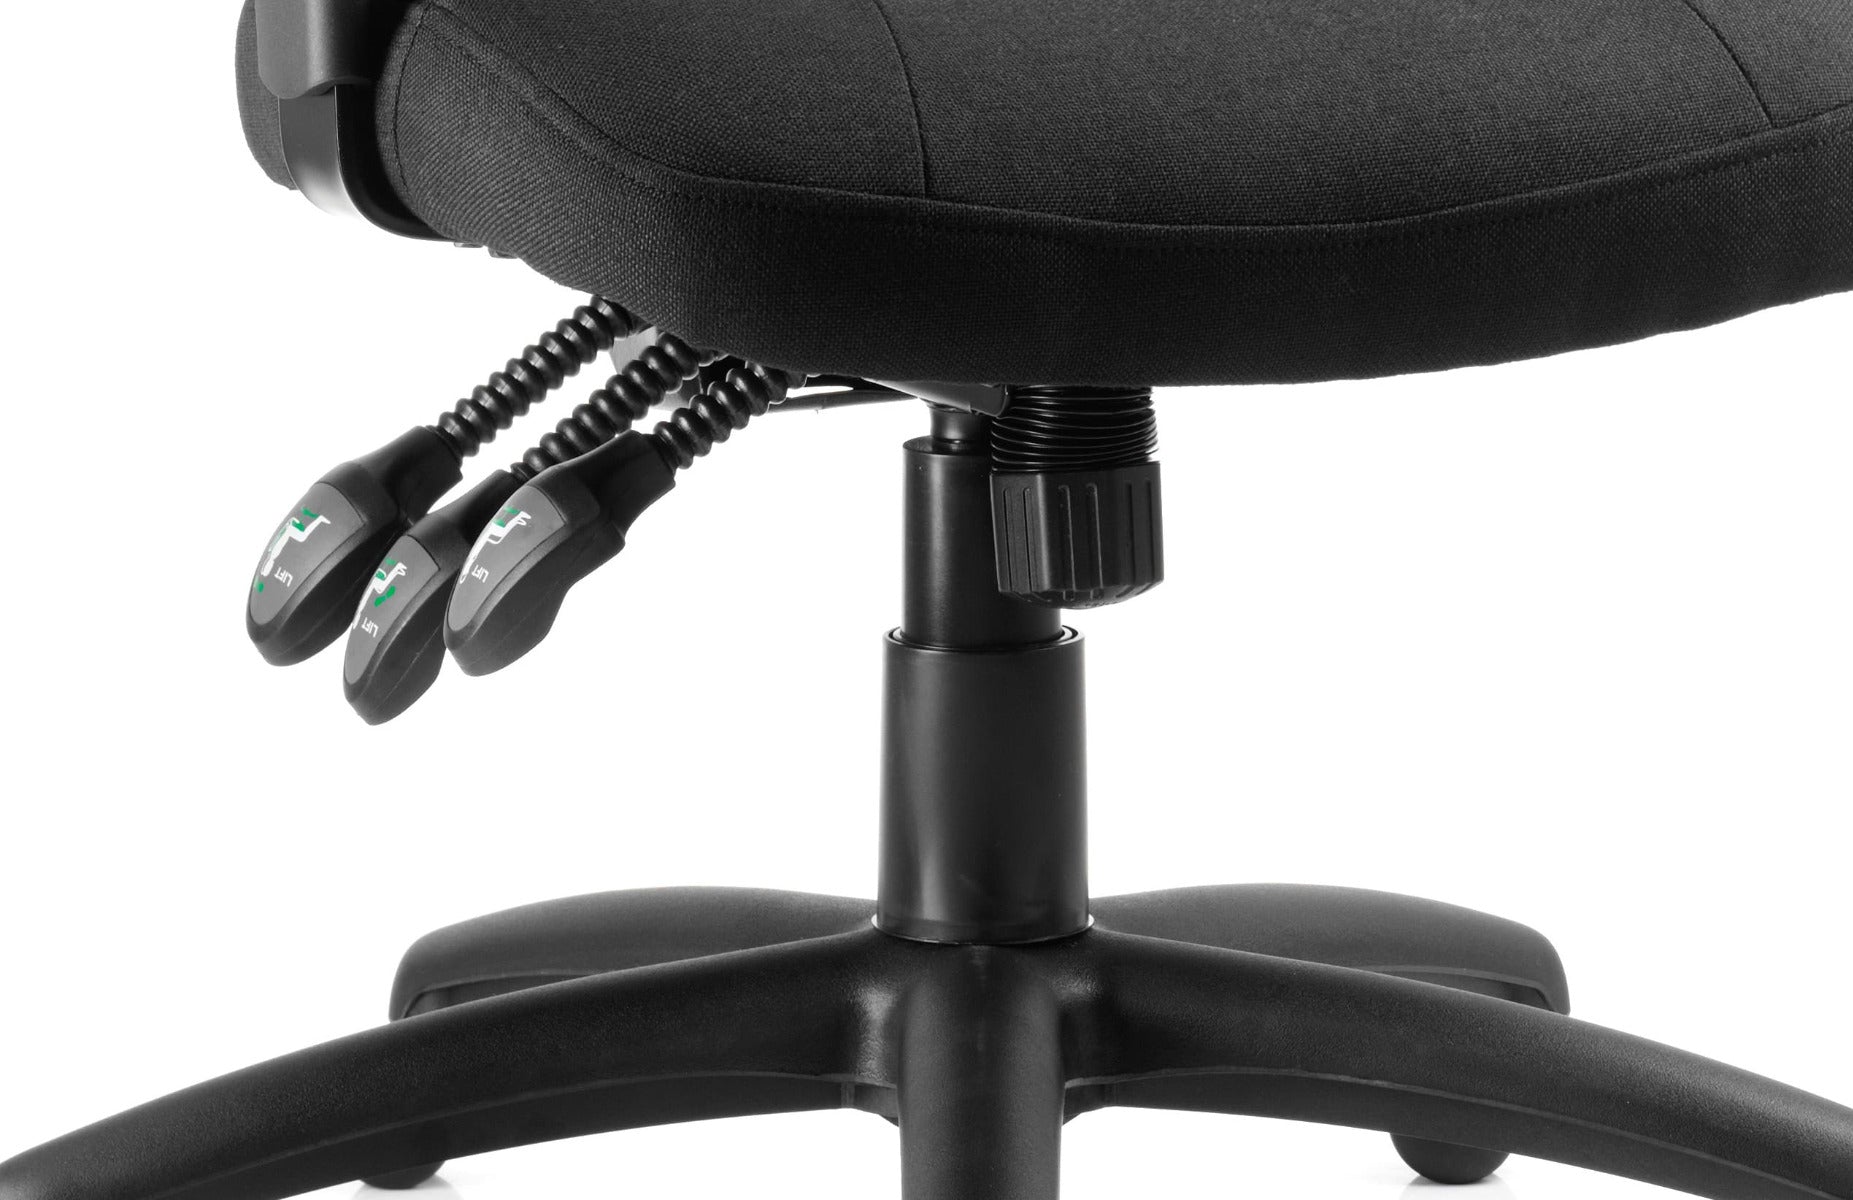 Galaxy Fabric Operator Office Chair - Black or Blue Option